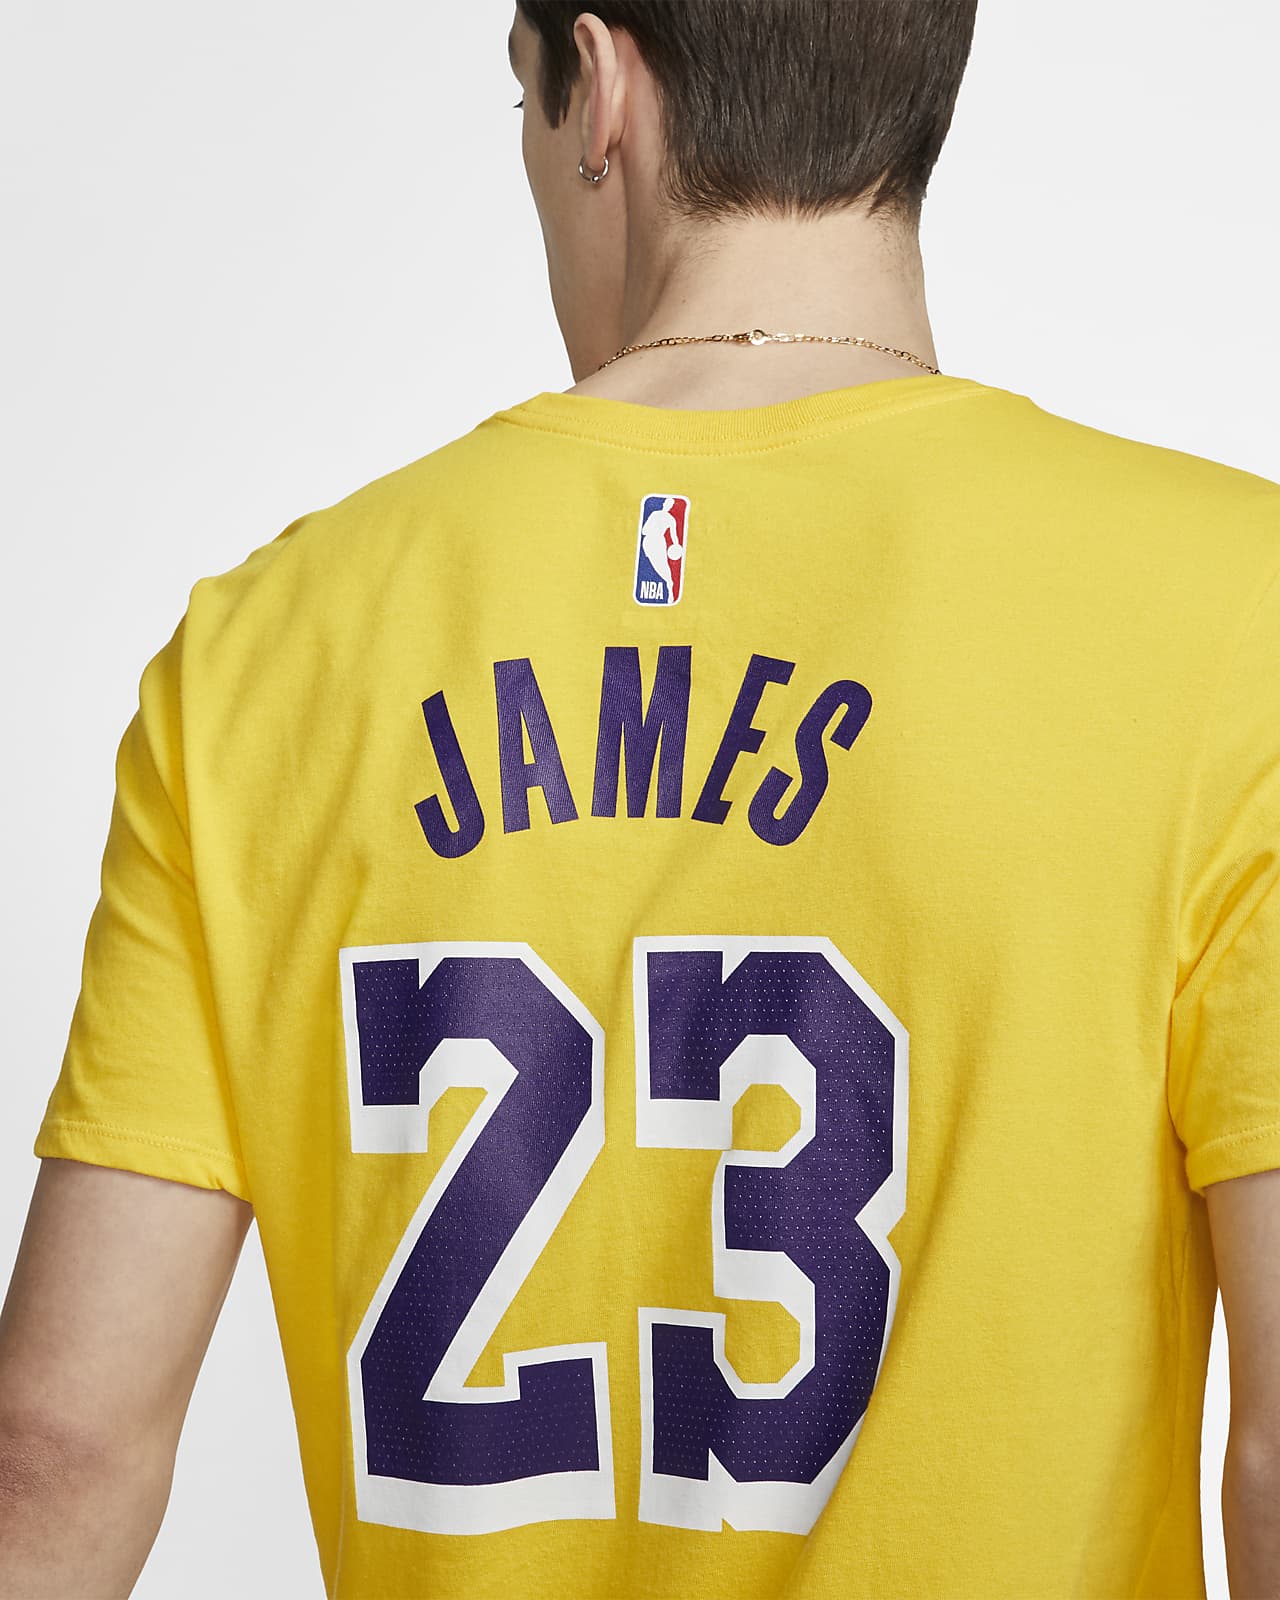 lebron lakers jersey 3xl Off 61% - www.bashhguidelines.org